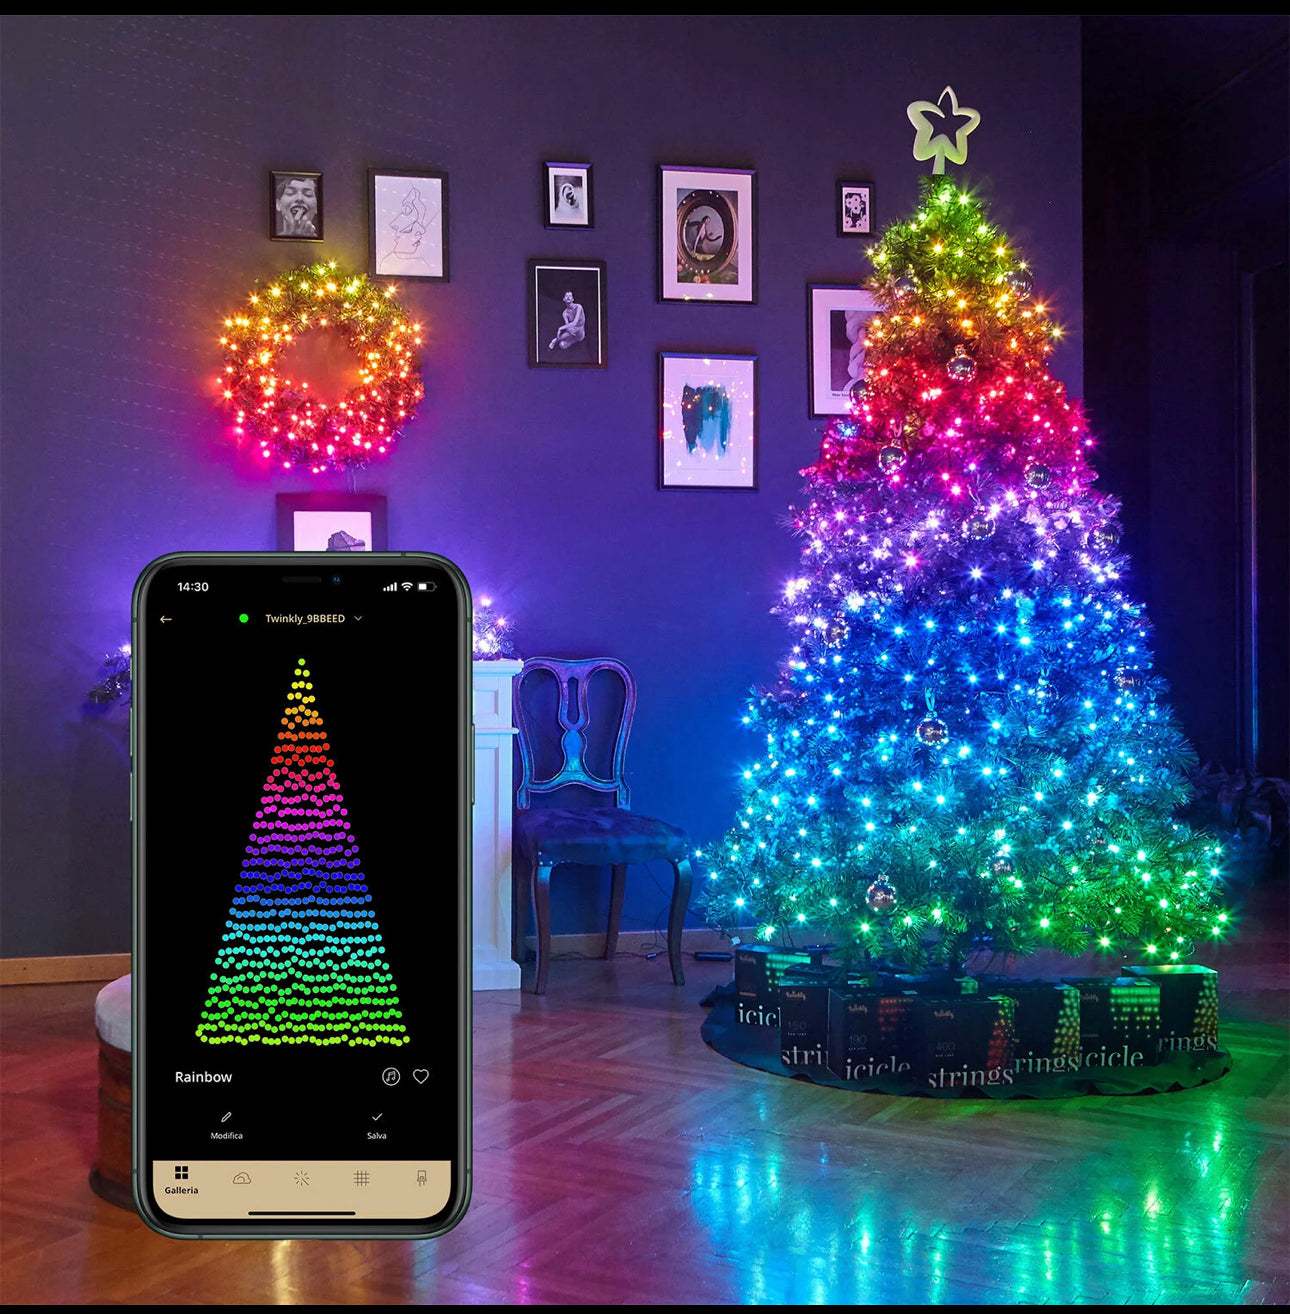 Phone Controlled Christmas Tree Lights